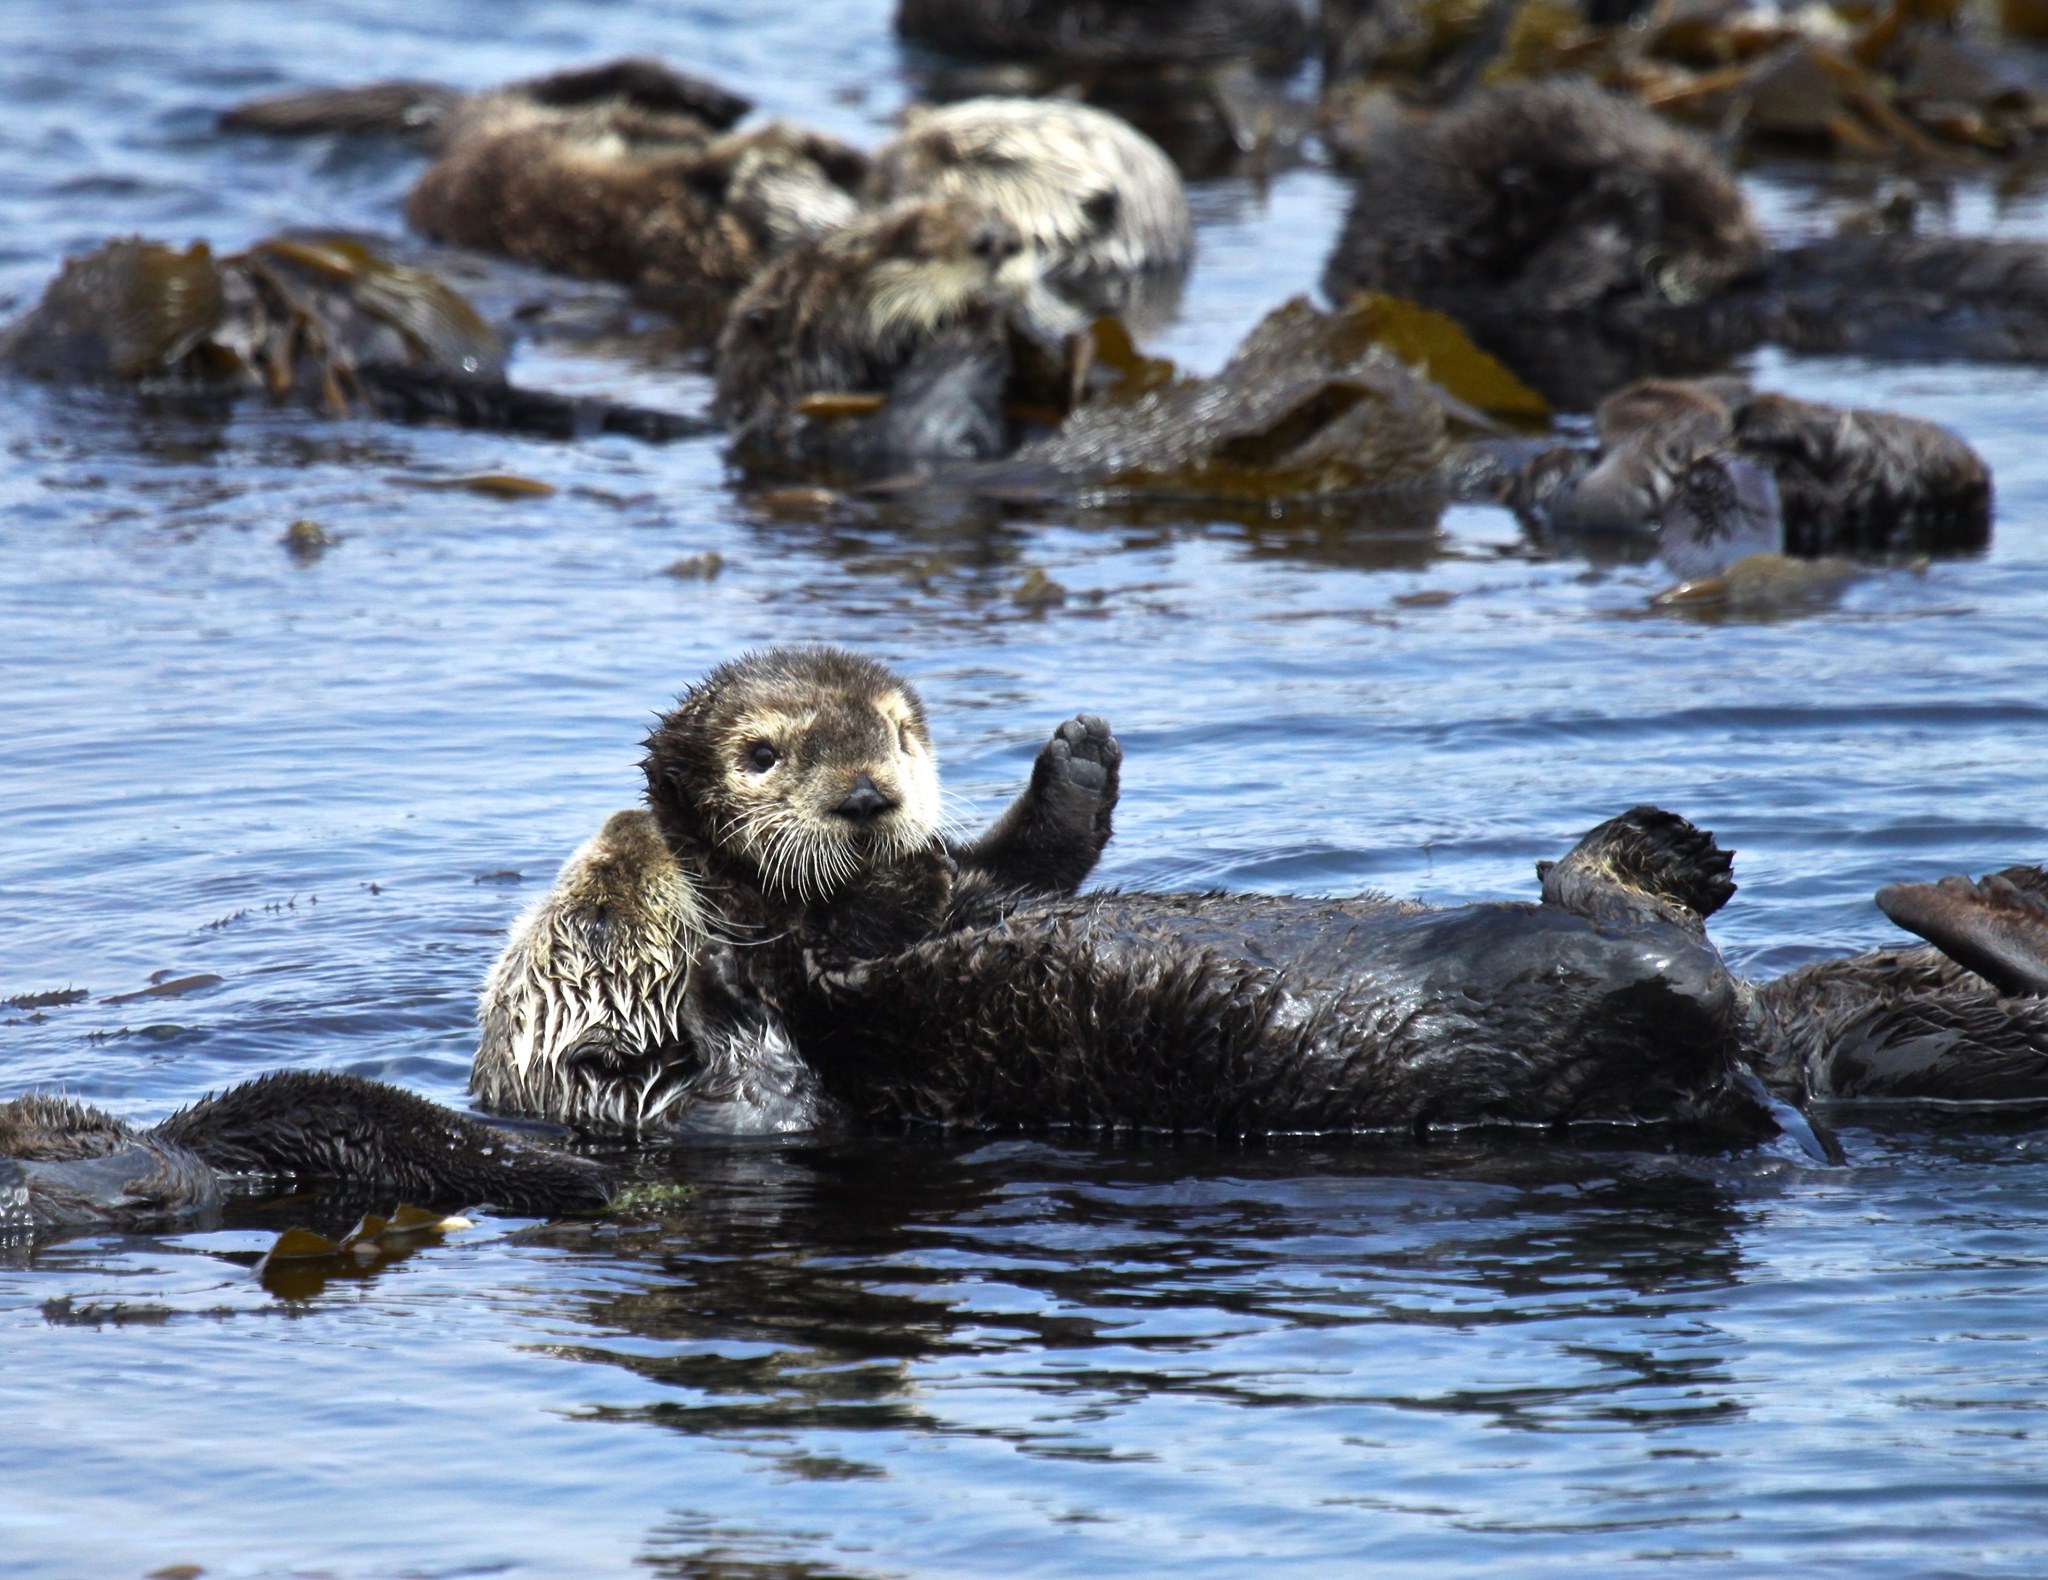 A baby sea otter lays on its mothers stomach while they both float in the water with other otters